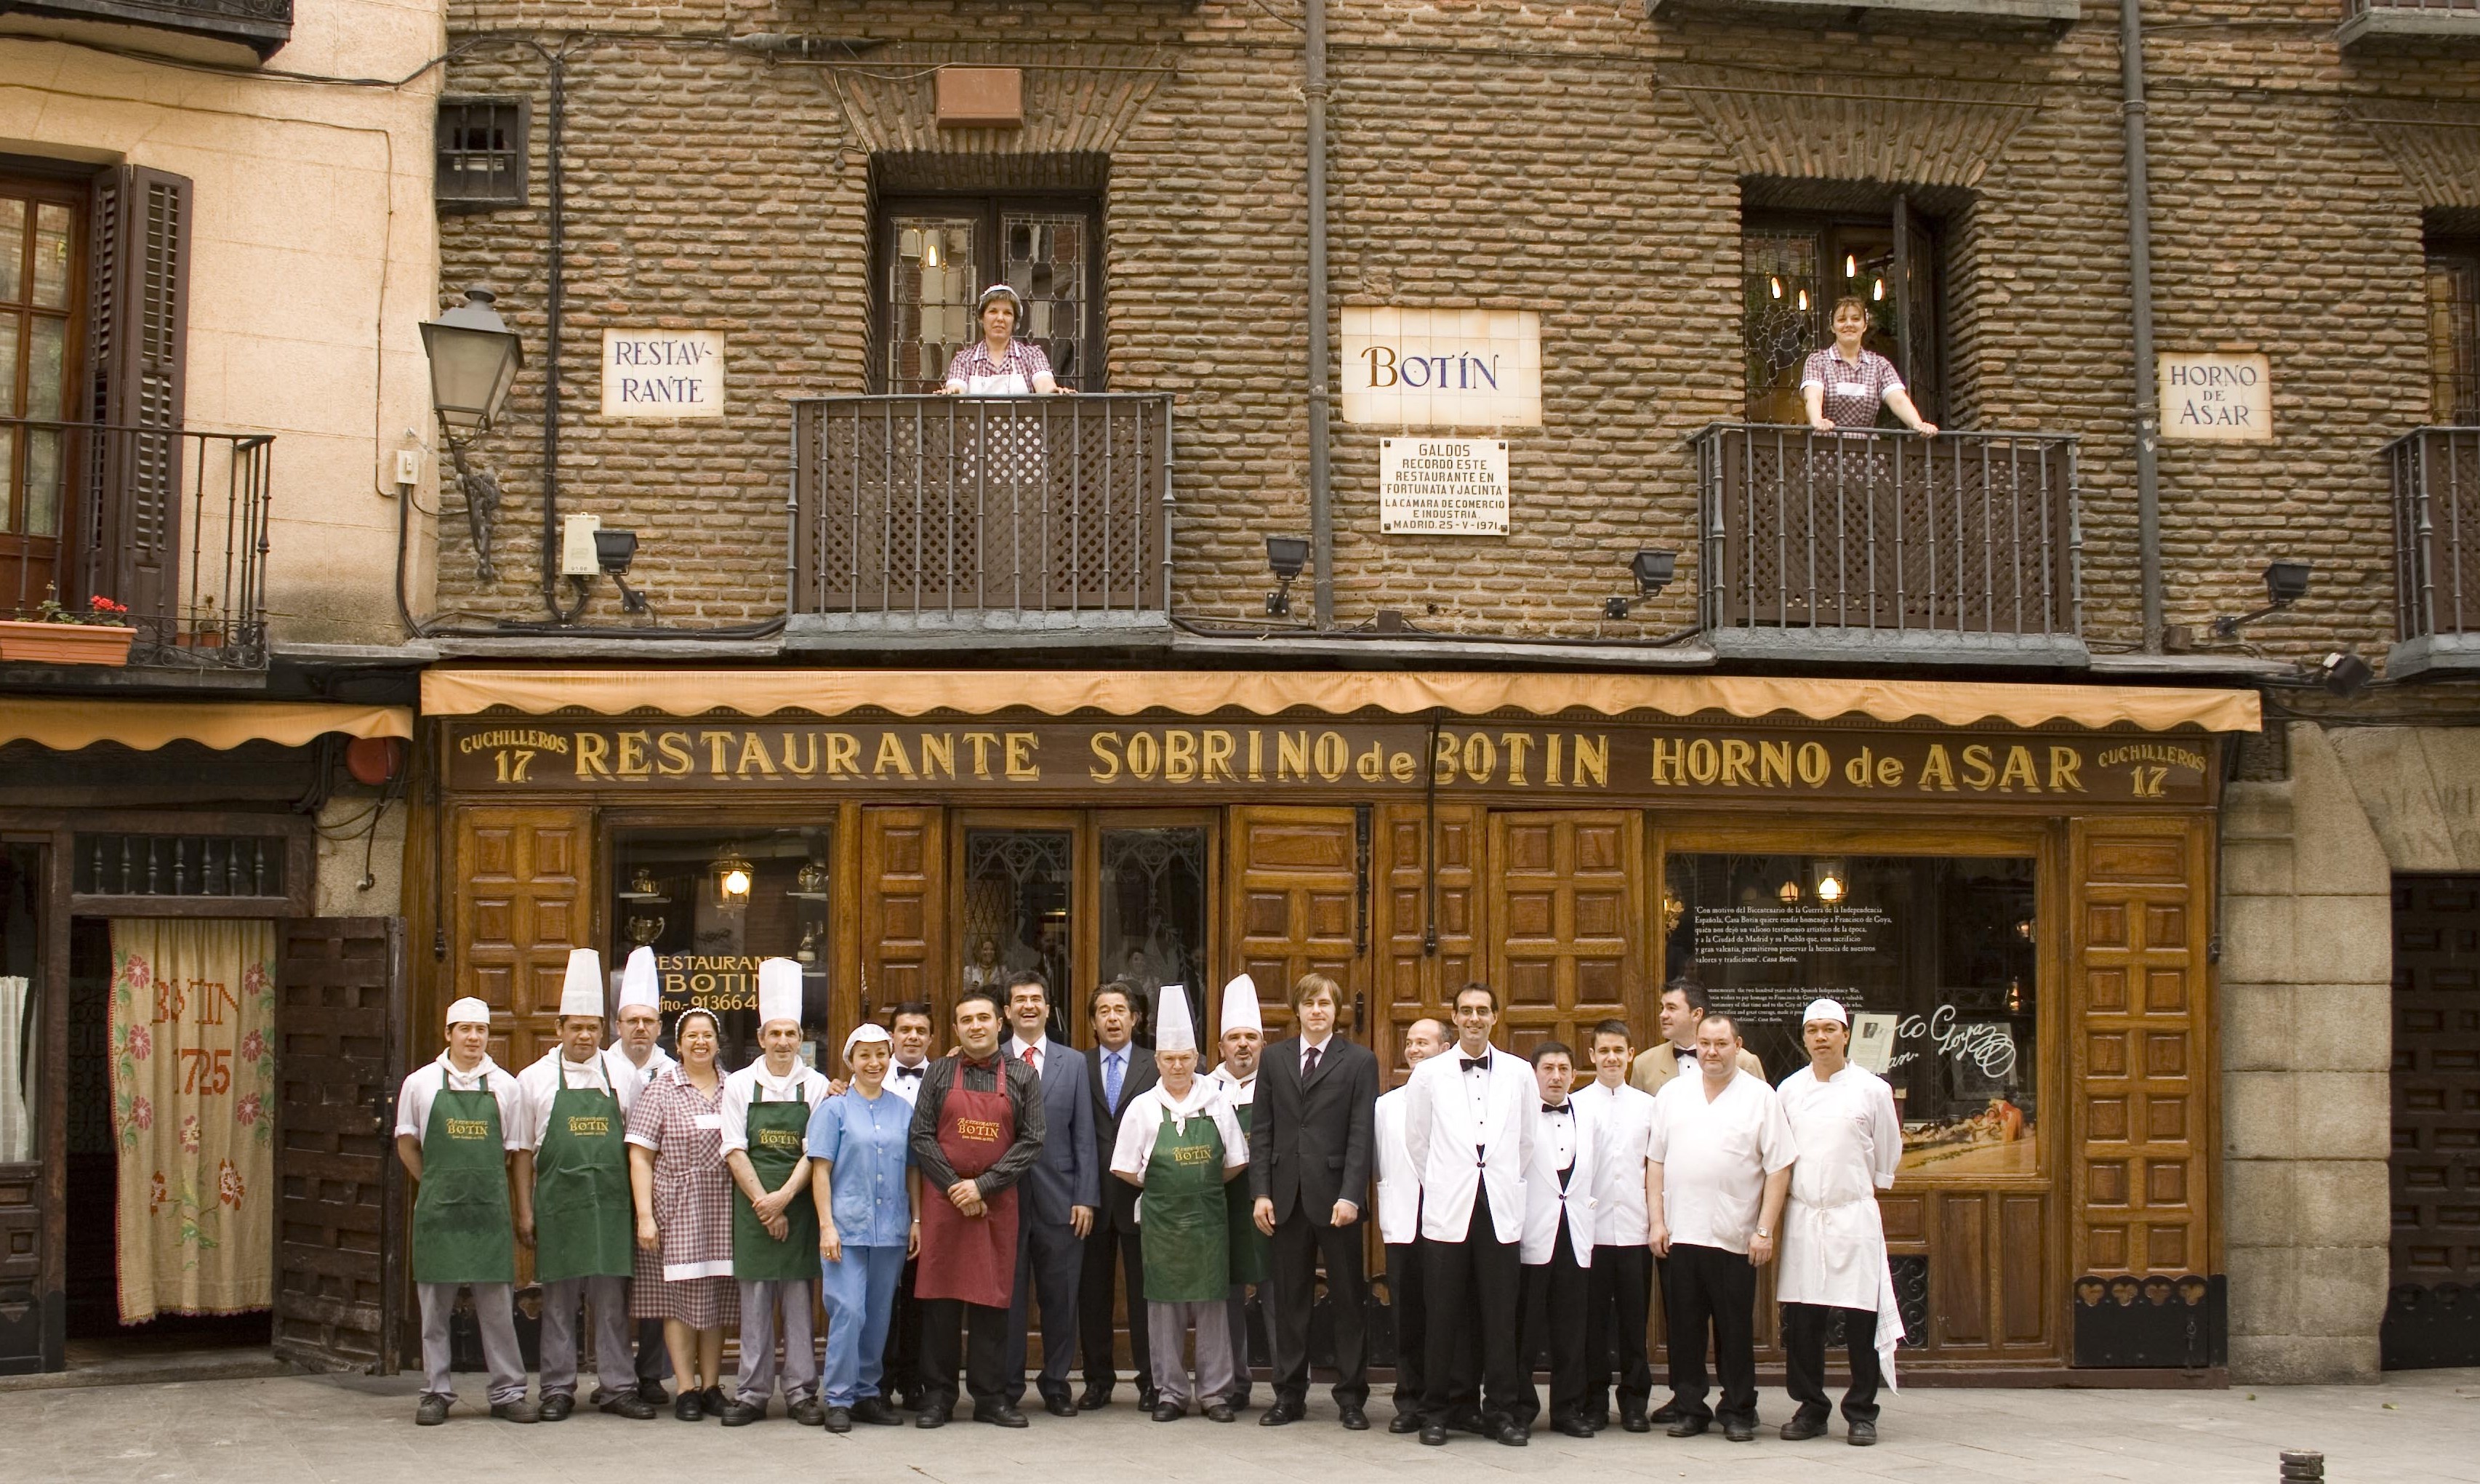 Daily Edit: The Oldest Restaurant in the World